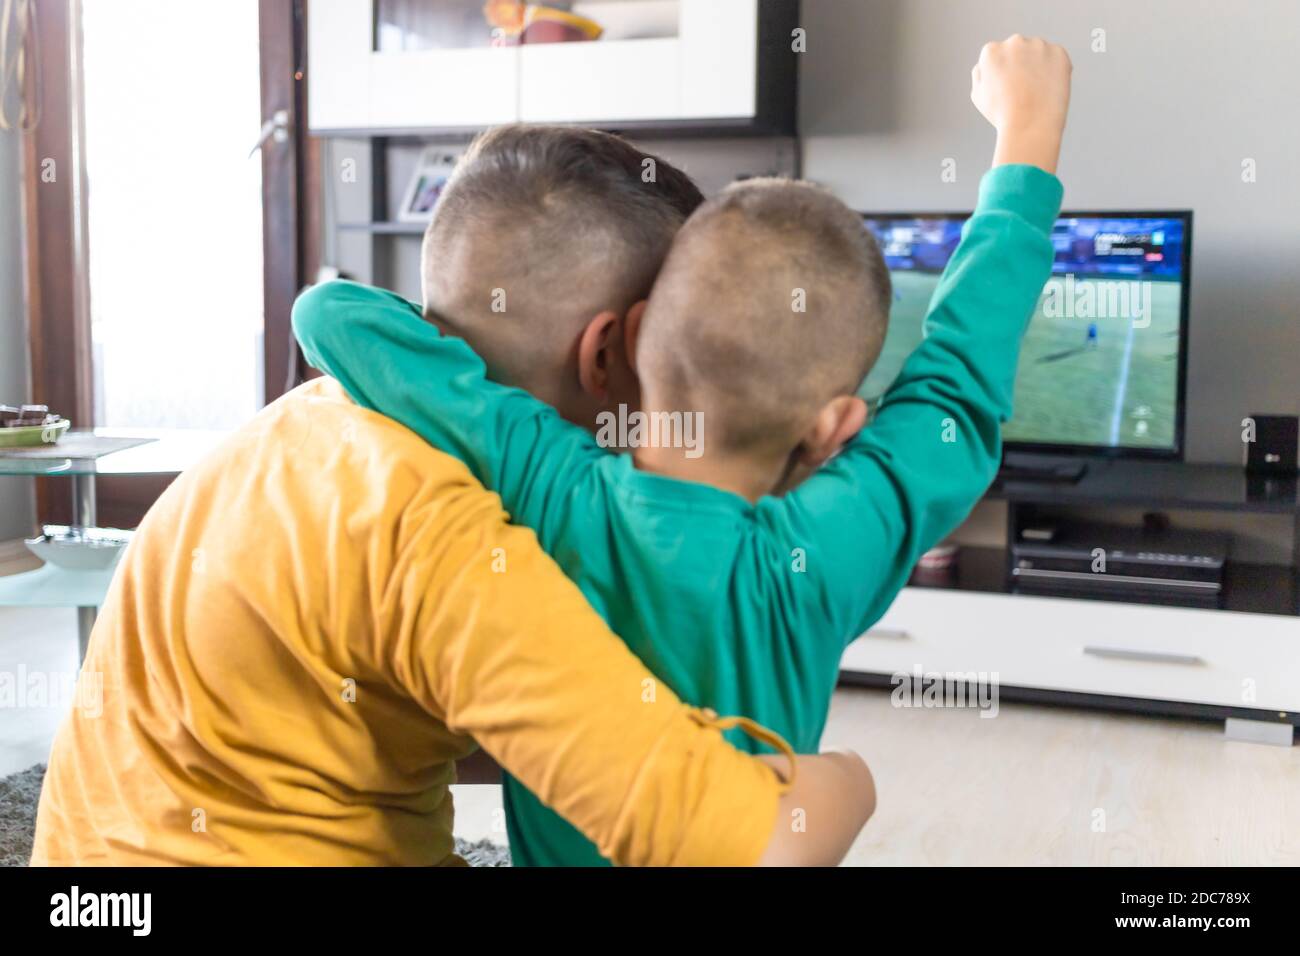 Kids, two boys watching soccer game on television, cheering, holding their arms up in the air Stock Photo